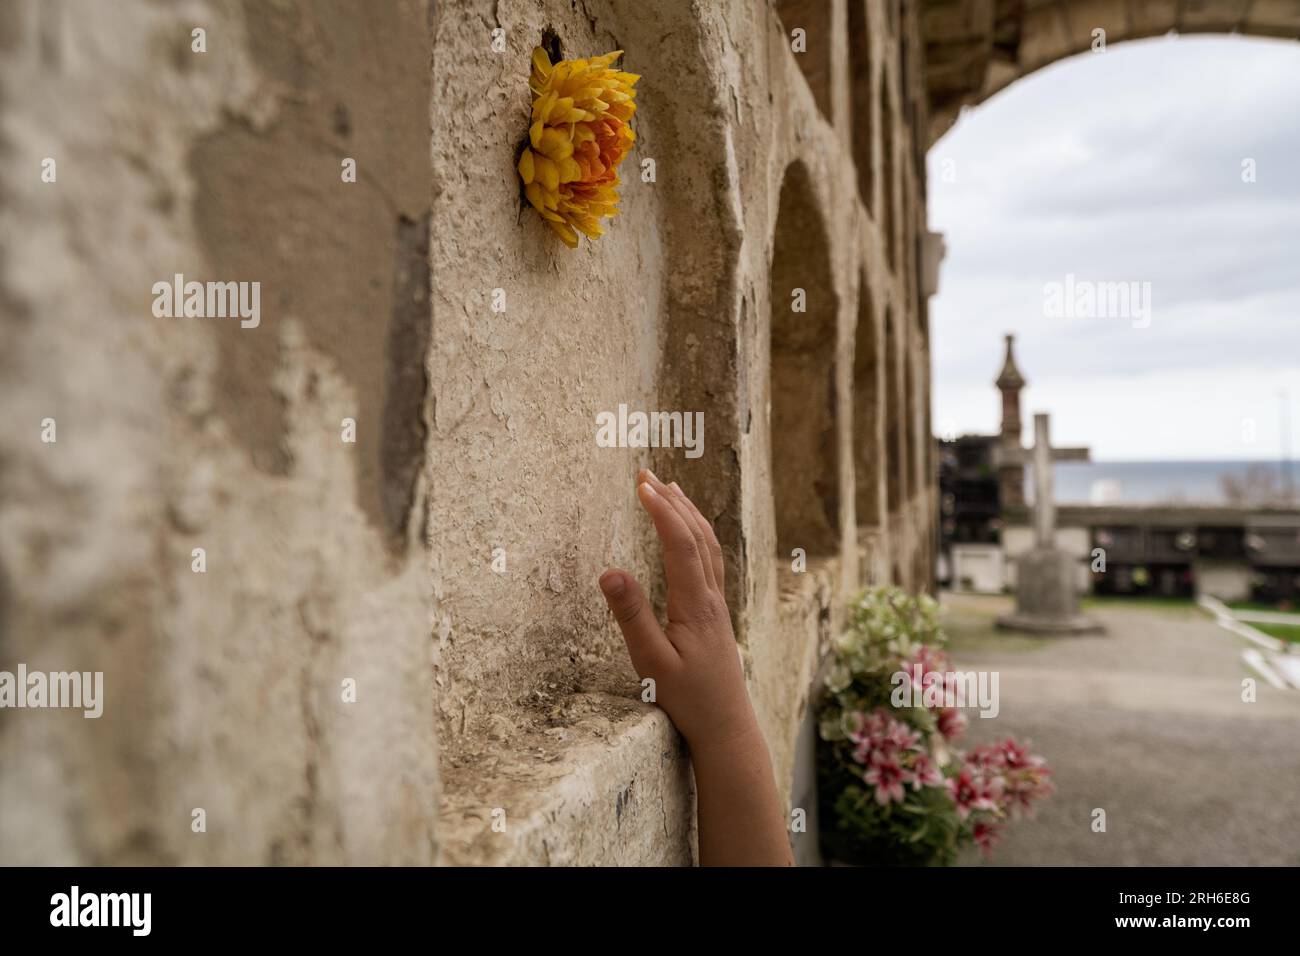 Child hand trying to reach a high flower on an abandoned cemetery tomb on a clowdy day Stock Photo